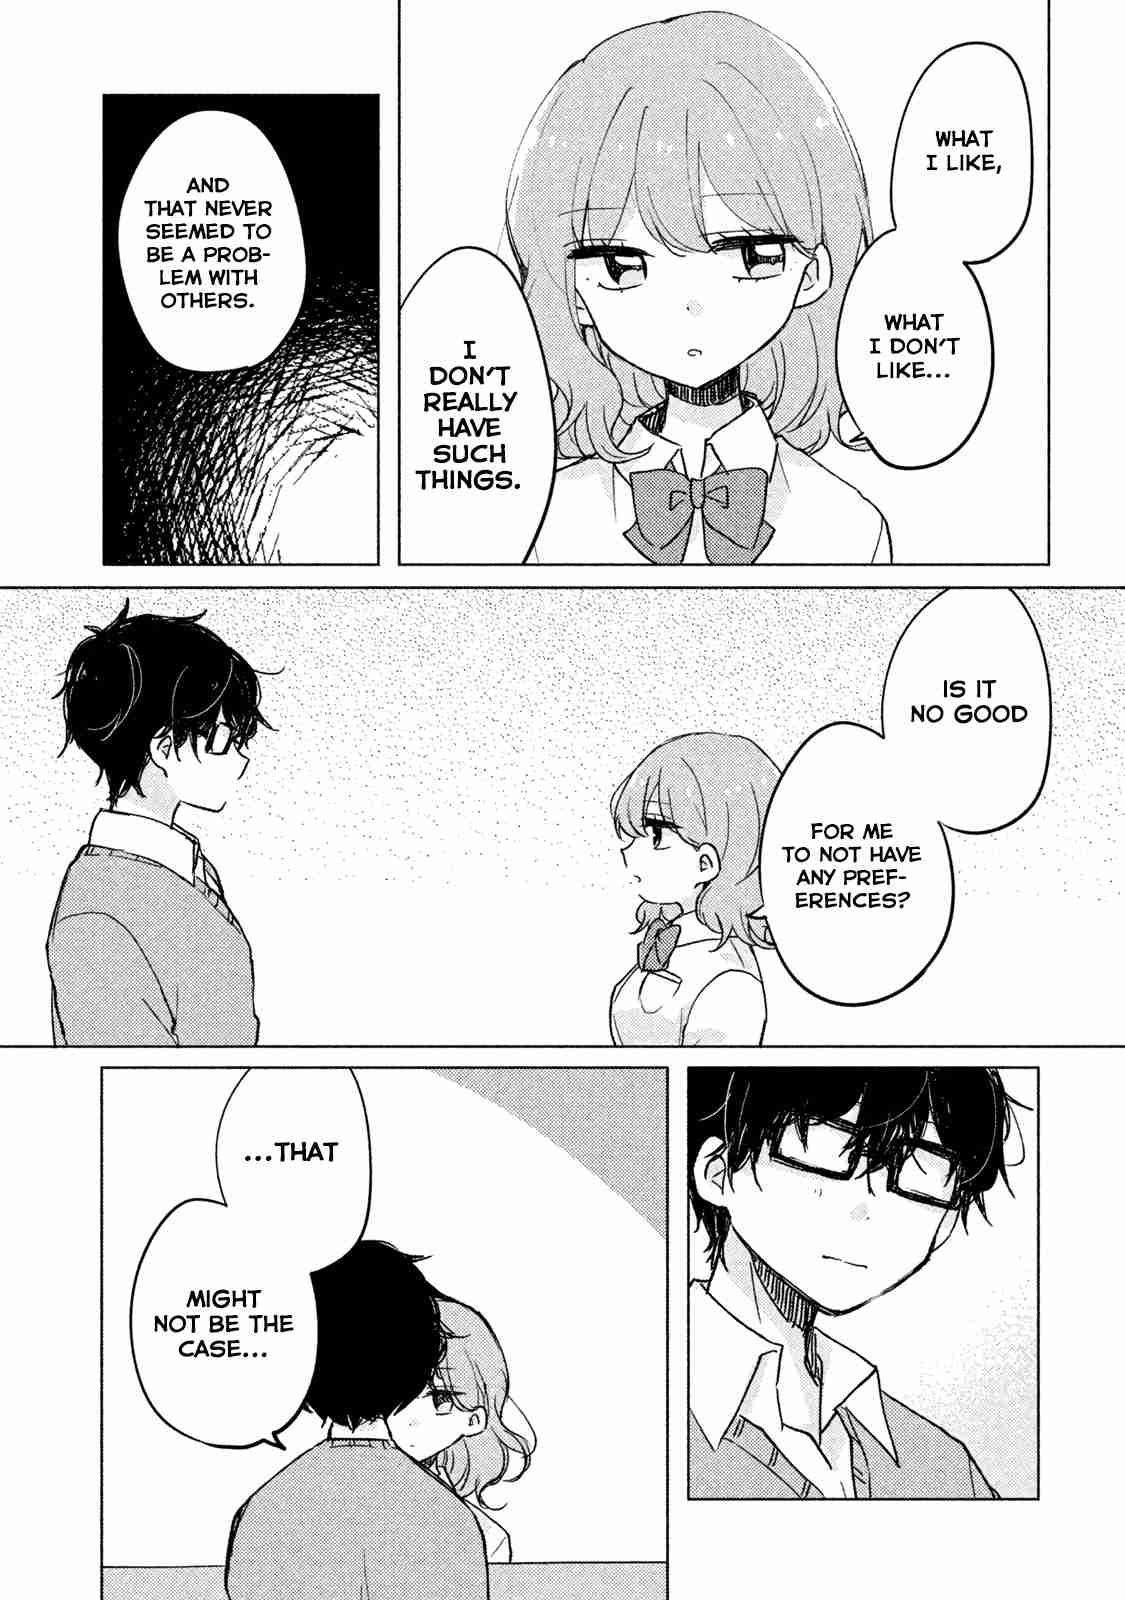 It's Not Meguro san's First Time Vol. 1 Ch. 3